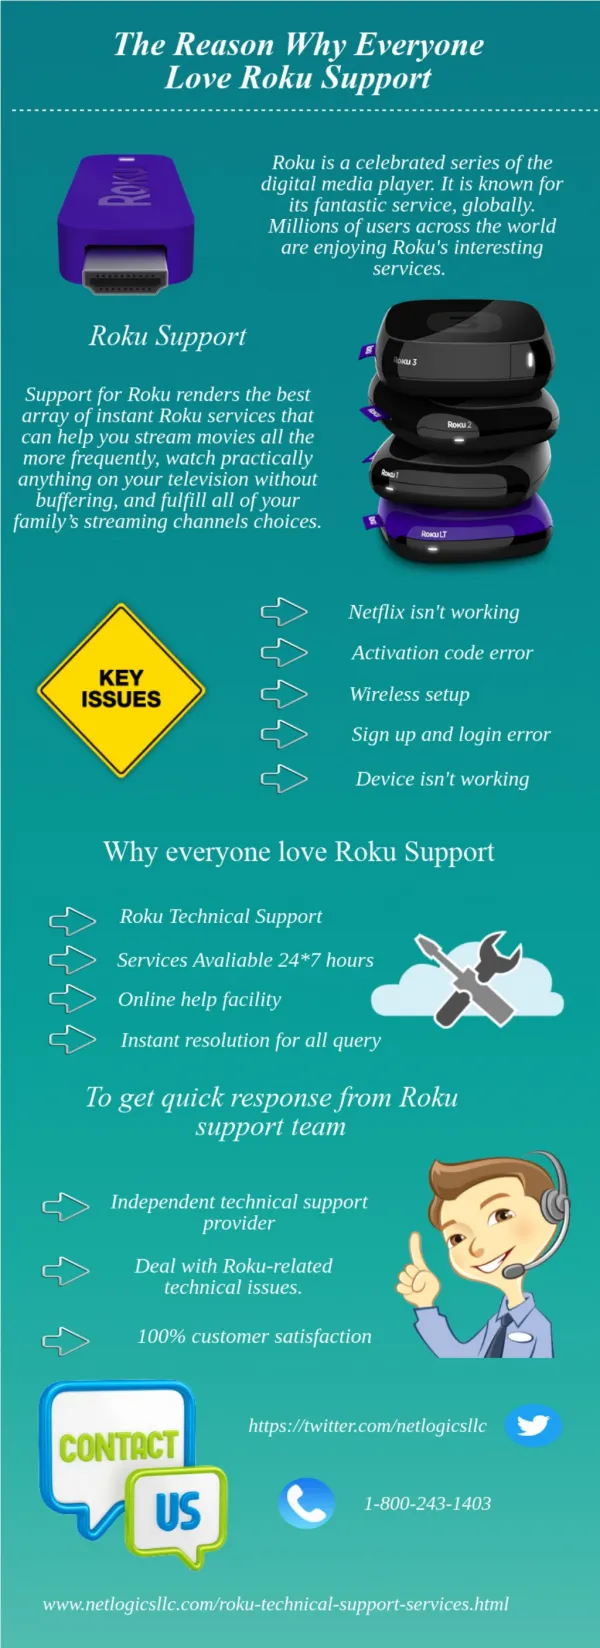 The reason Why Everyone Love Roku Support